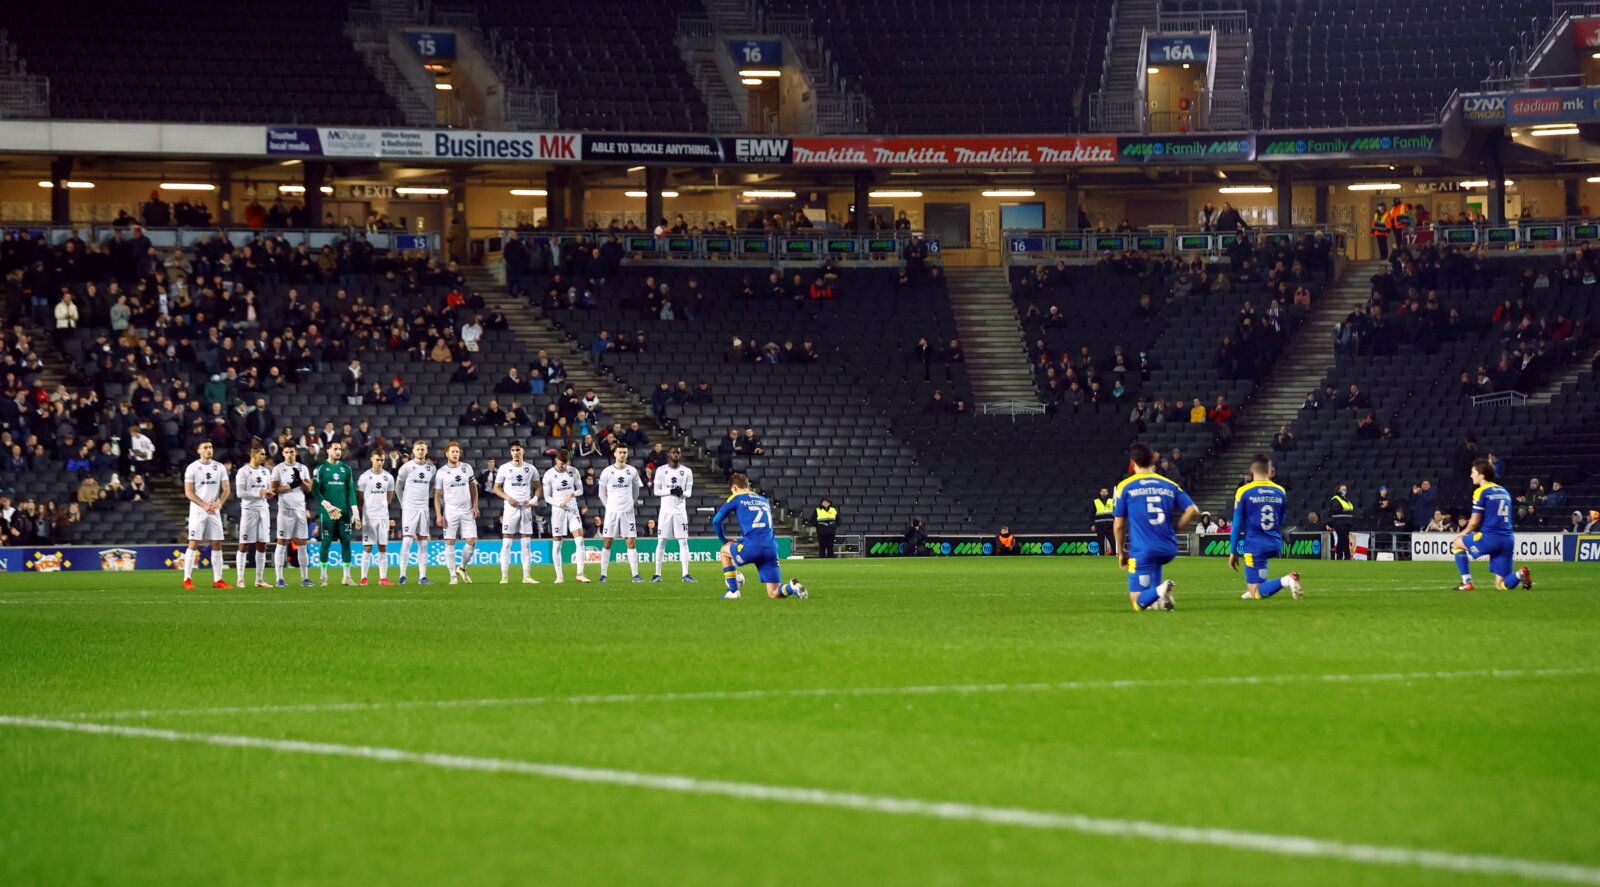 Soccer Football - League One - Milton Keynes Dons v AFC Wimbledon - Stadium MK, Milton Keynes, Britain - January 11, 2022 Milton Keynes Dons players stand together as AFC Wimbledon players kneel before the match Action Images/Andrew Boyers  EDITORIAL USE ONLY. No use with unauthorized audio, video, data, fixture lists, club/league logos or 